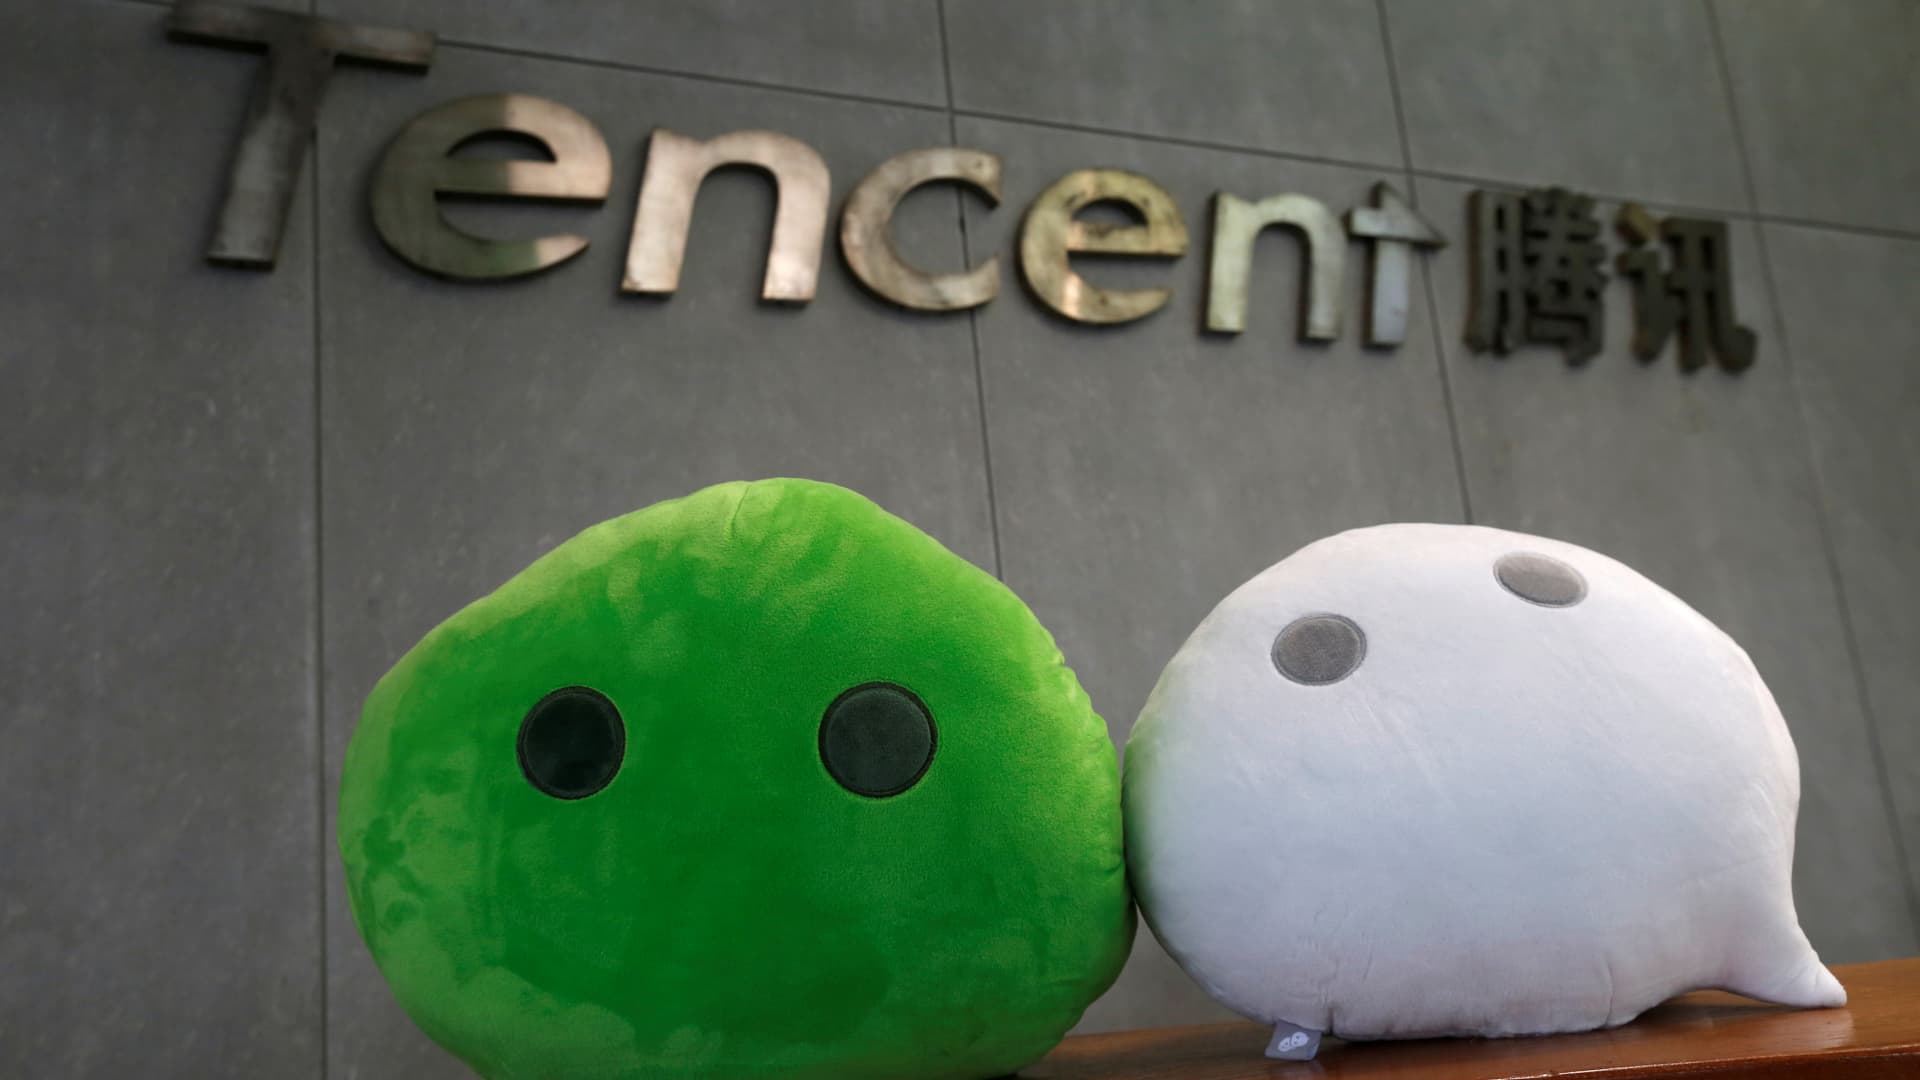 Tencent bets on cloud computing growth abroad amid gaming slowdown